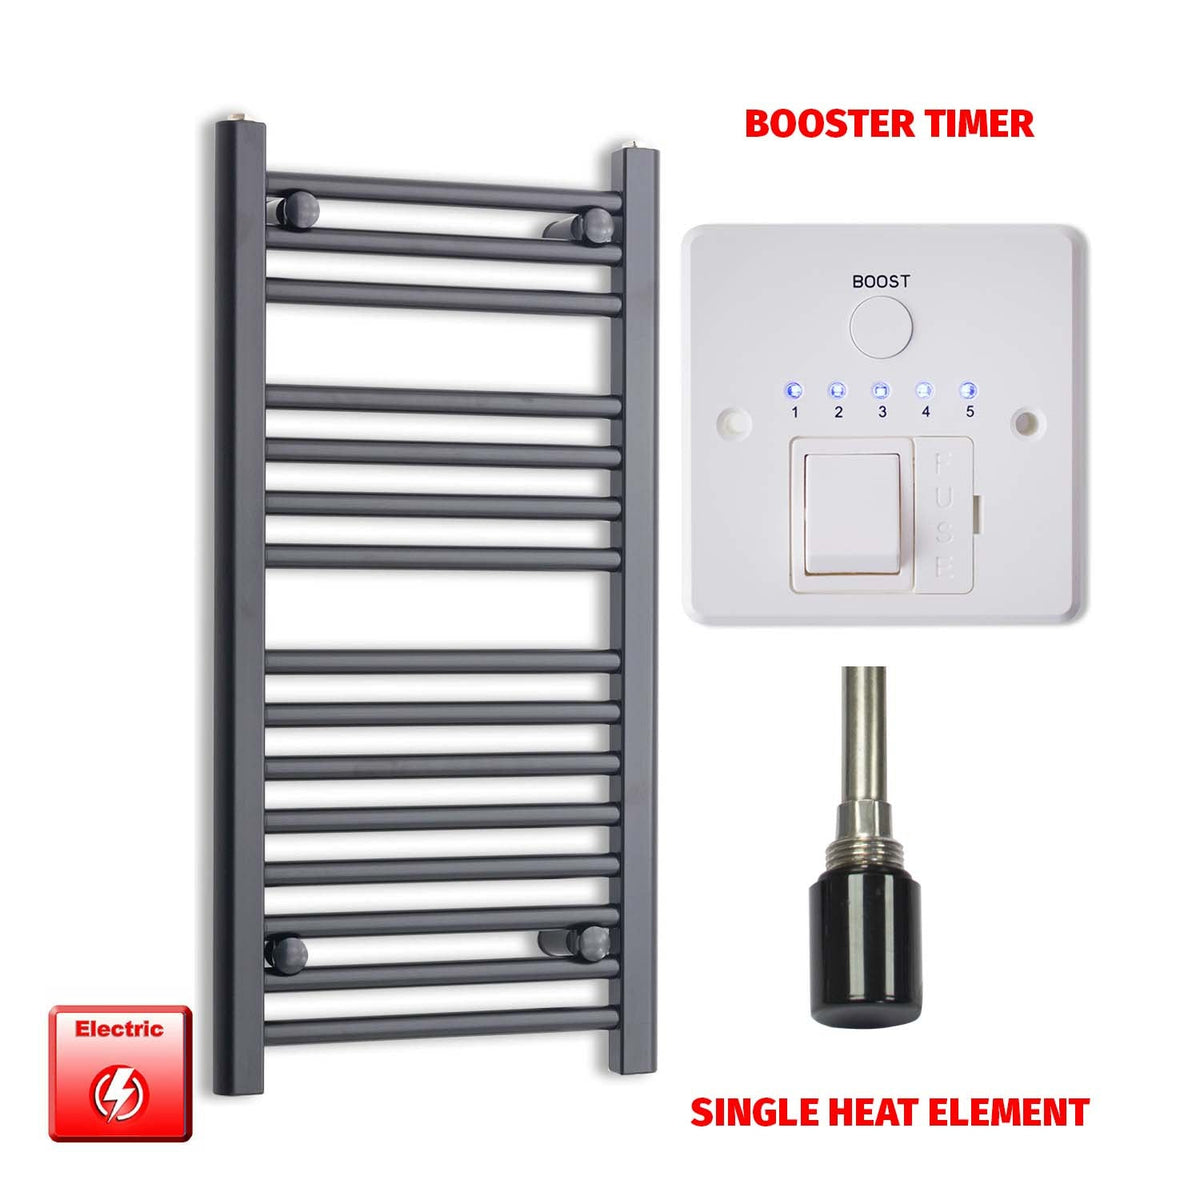 800mm High 400mm Wide Flat Black Pre-Filled Electric Heated Towel Radiator HTR Single Heat Booster Timer